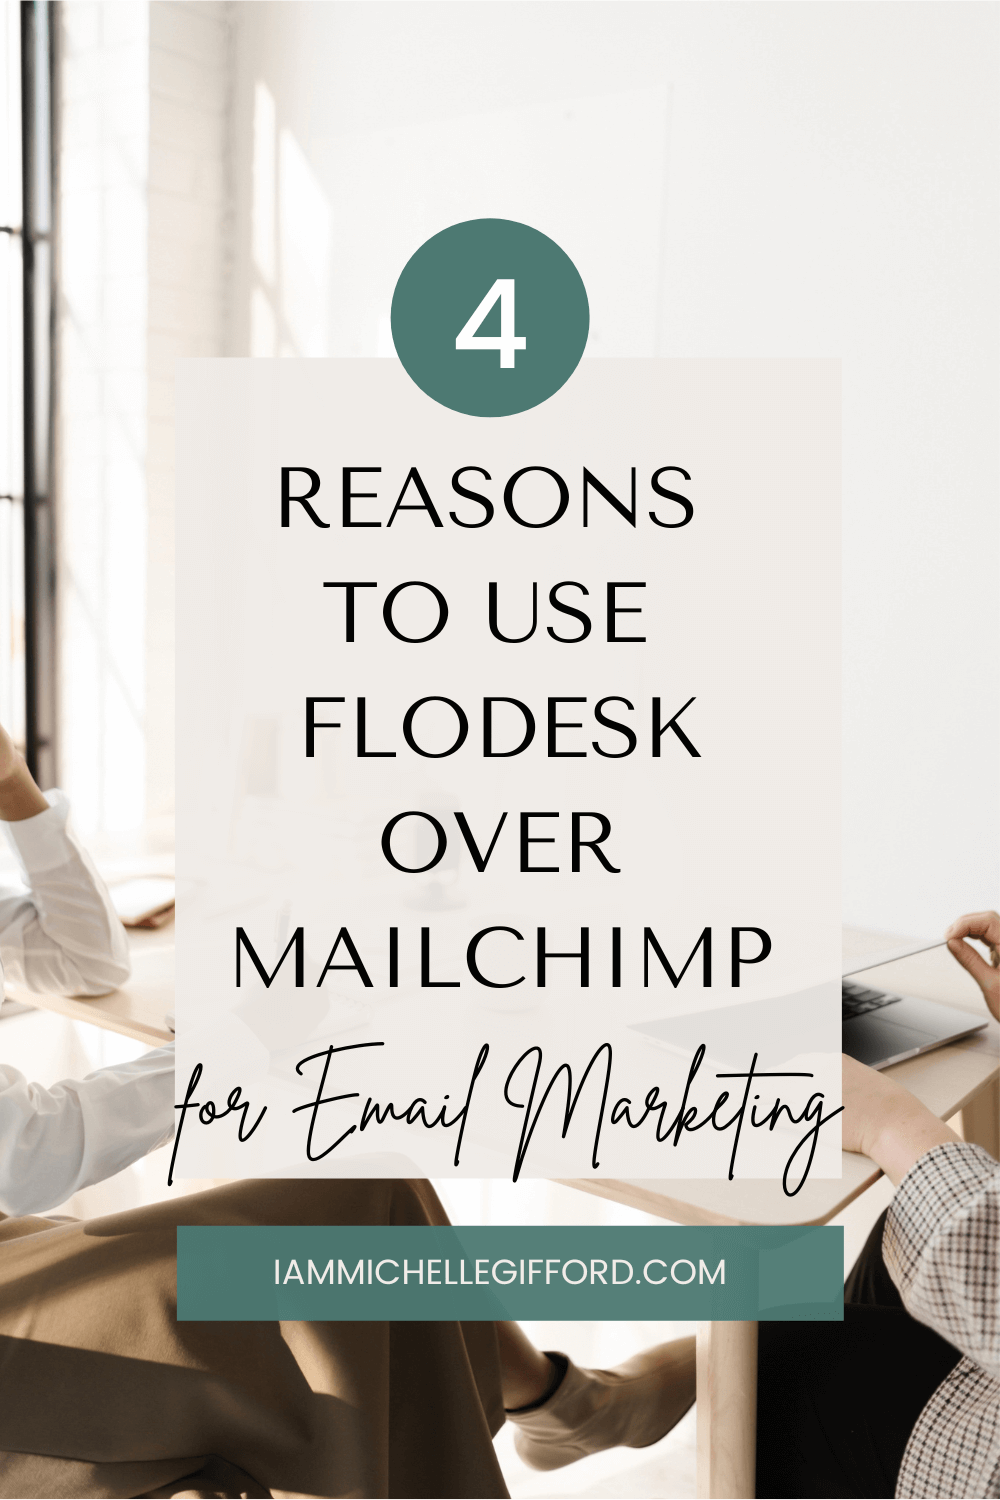 4 Reasons to use flodesk over mailchimo for email marketing. Two people sitting with computers. I am Michelle Gifford. com